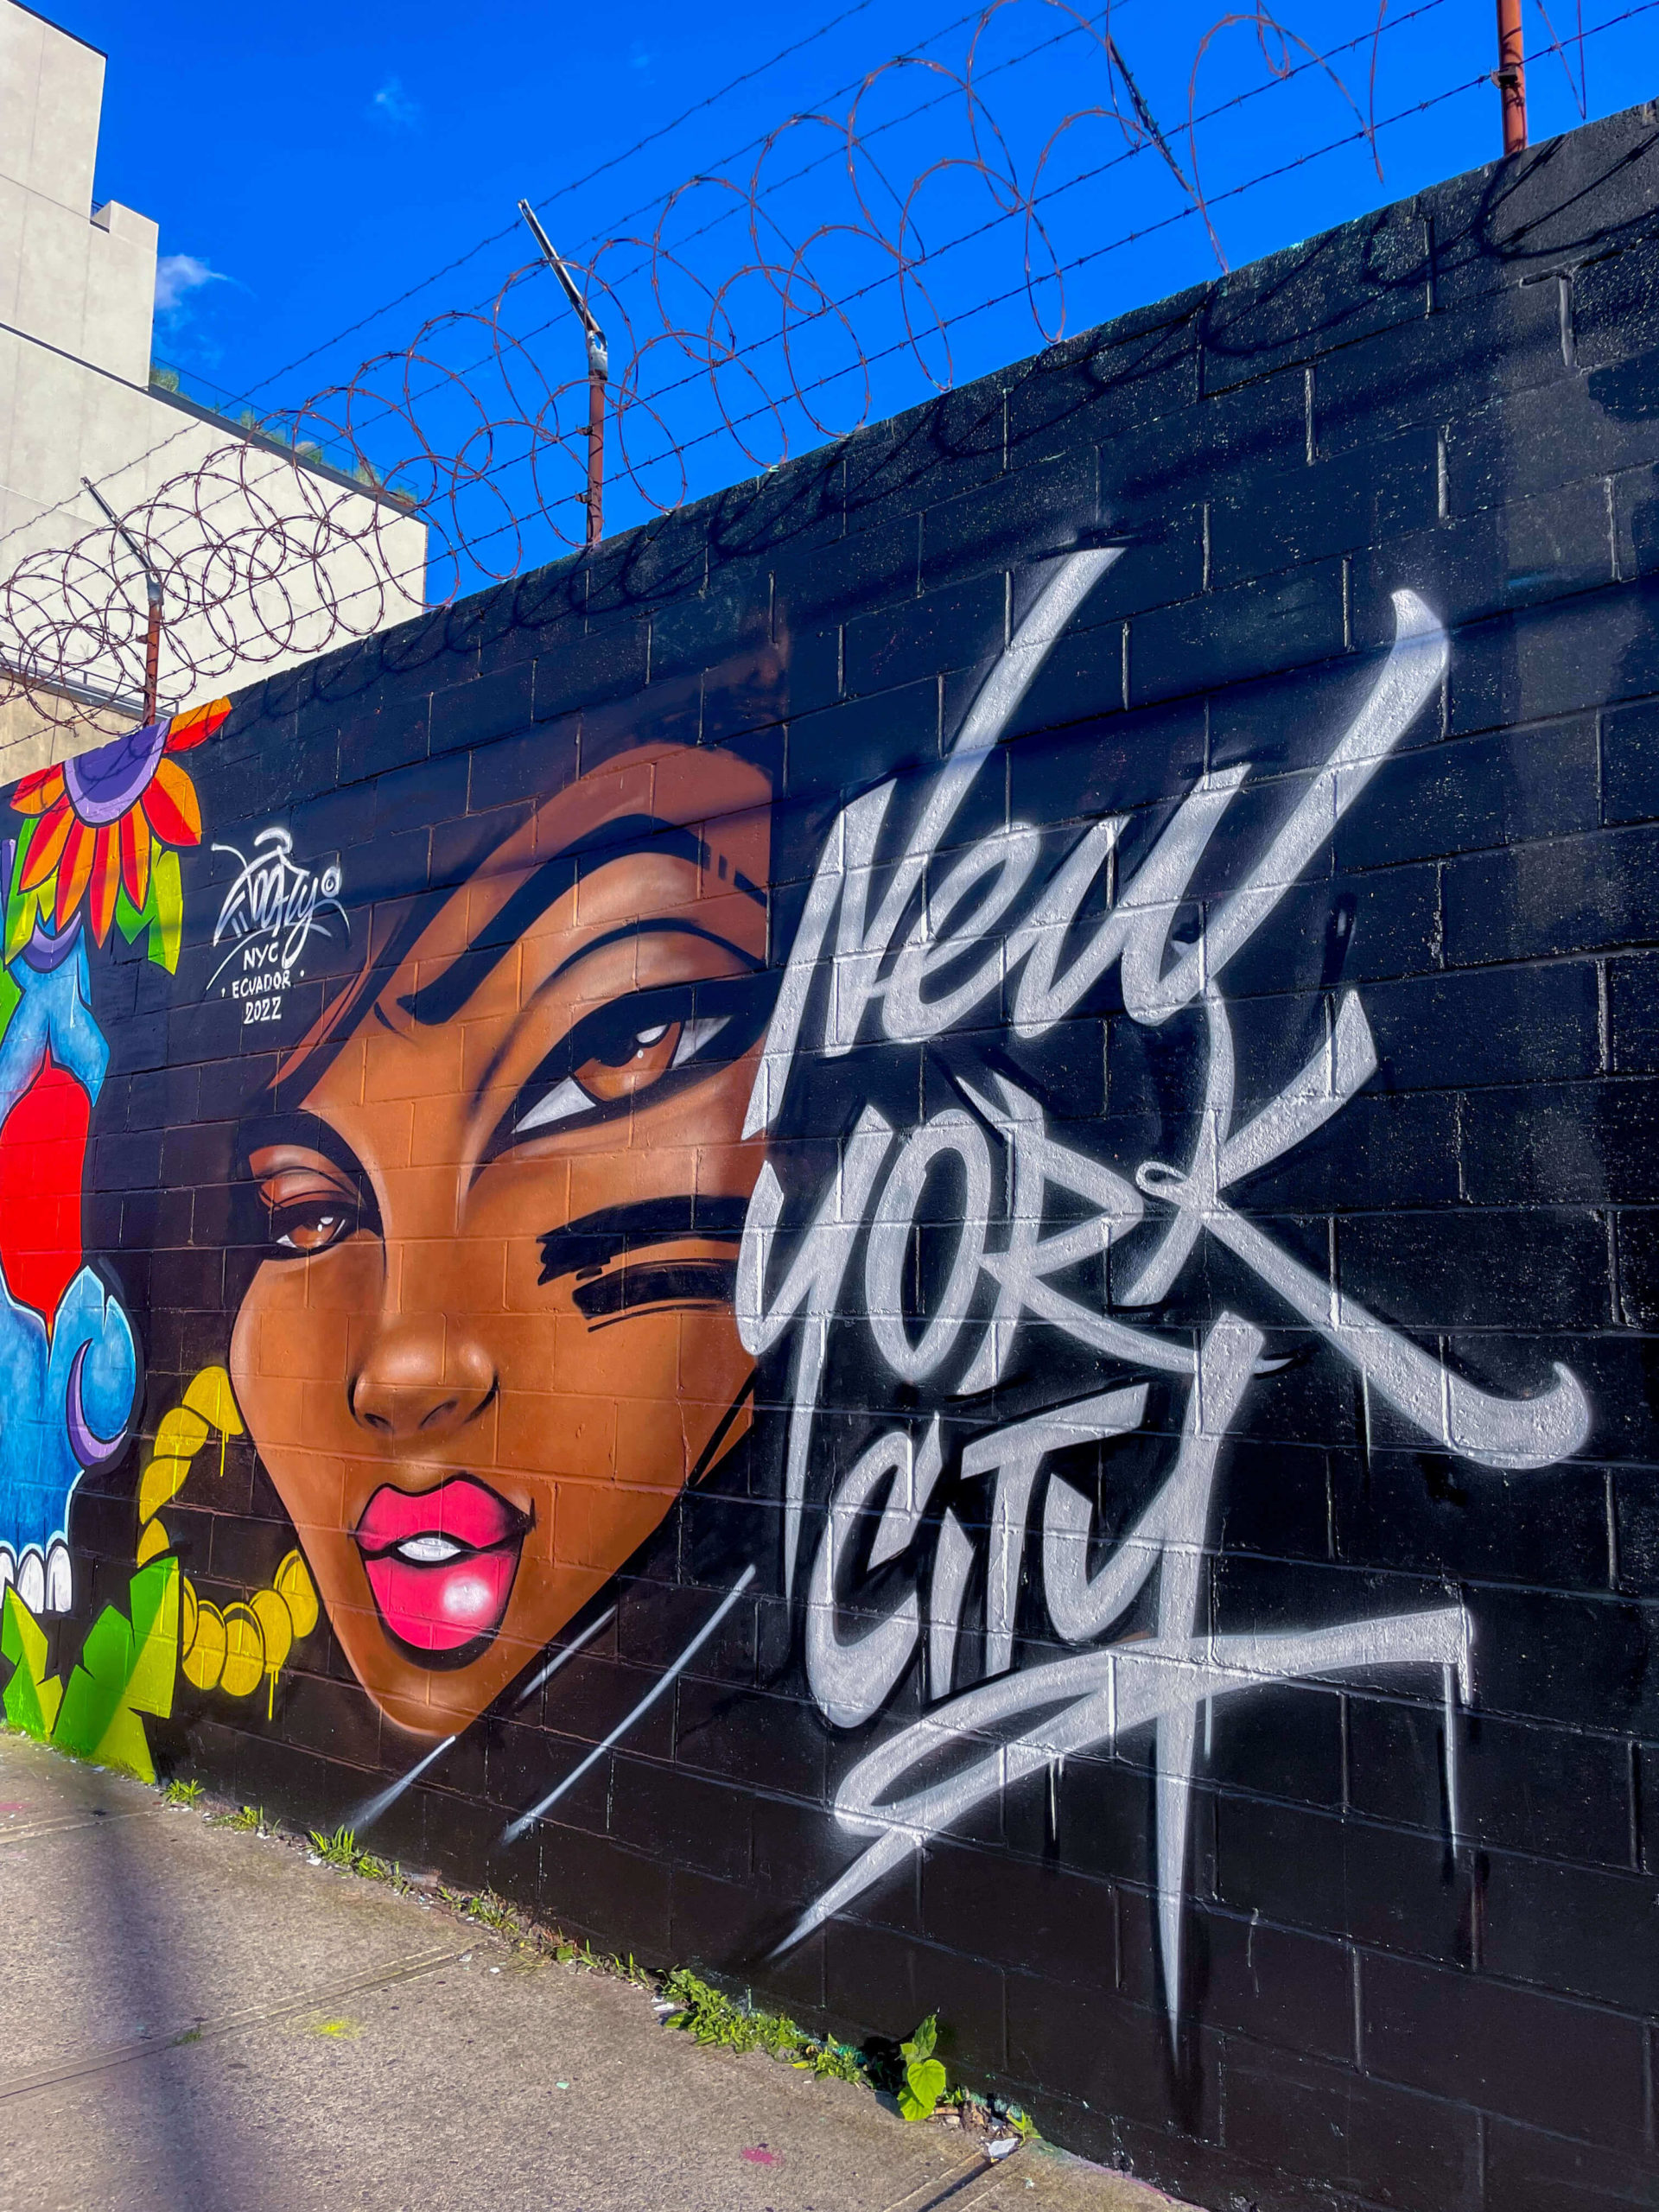 Street art ed eventi a New York: Welling Court Mural Project ad Astoria